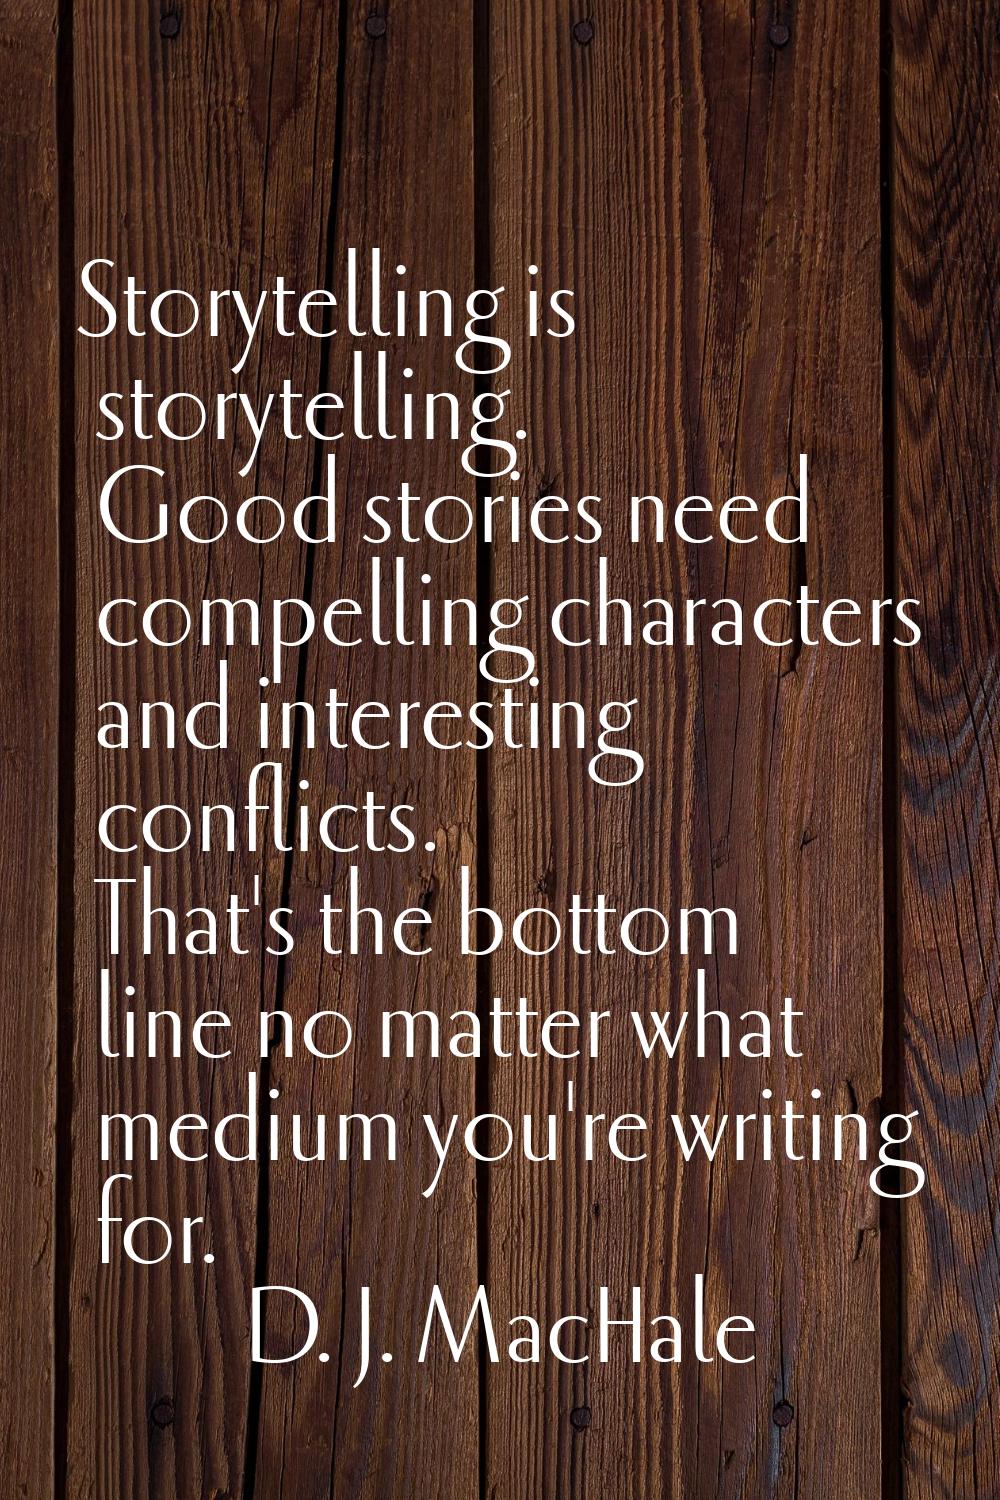 Storytelling is storytelling. Good stories need compelling characters and interesting conflicts. Th